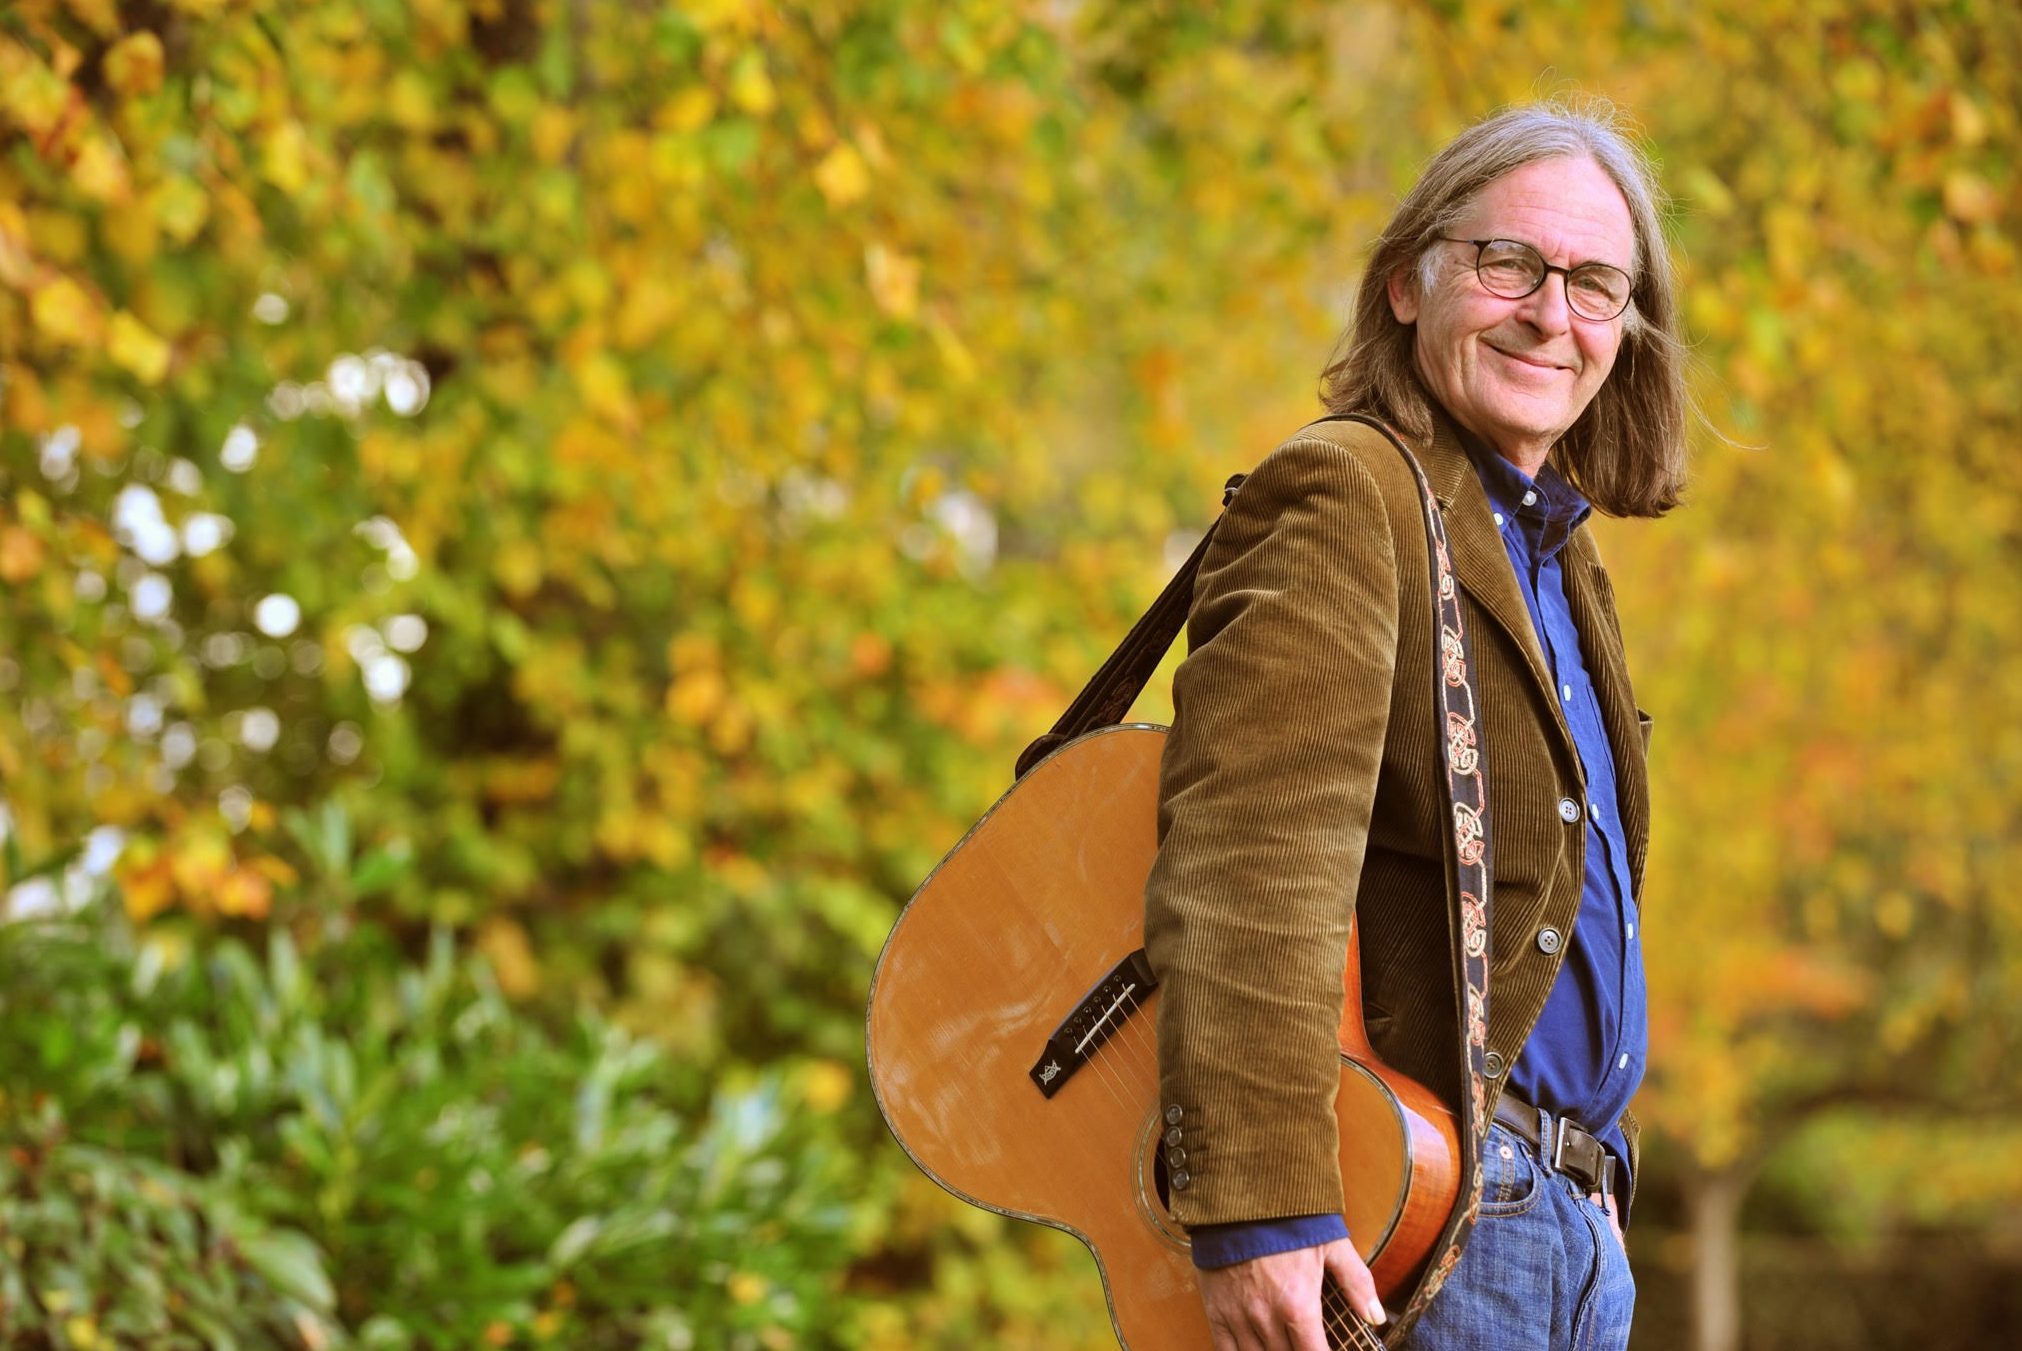 Caledonia's still calling him Dougie Maclean interview